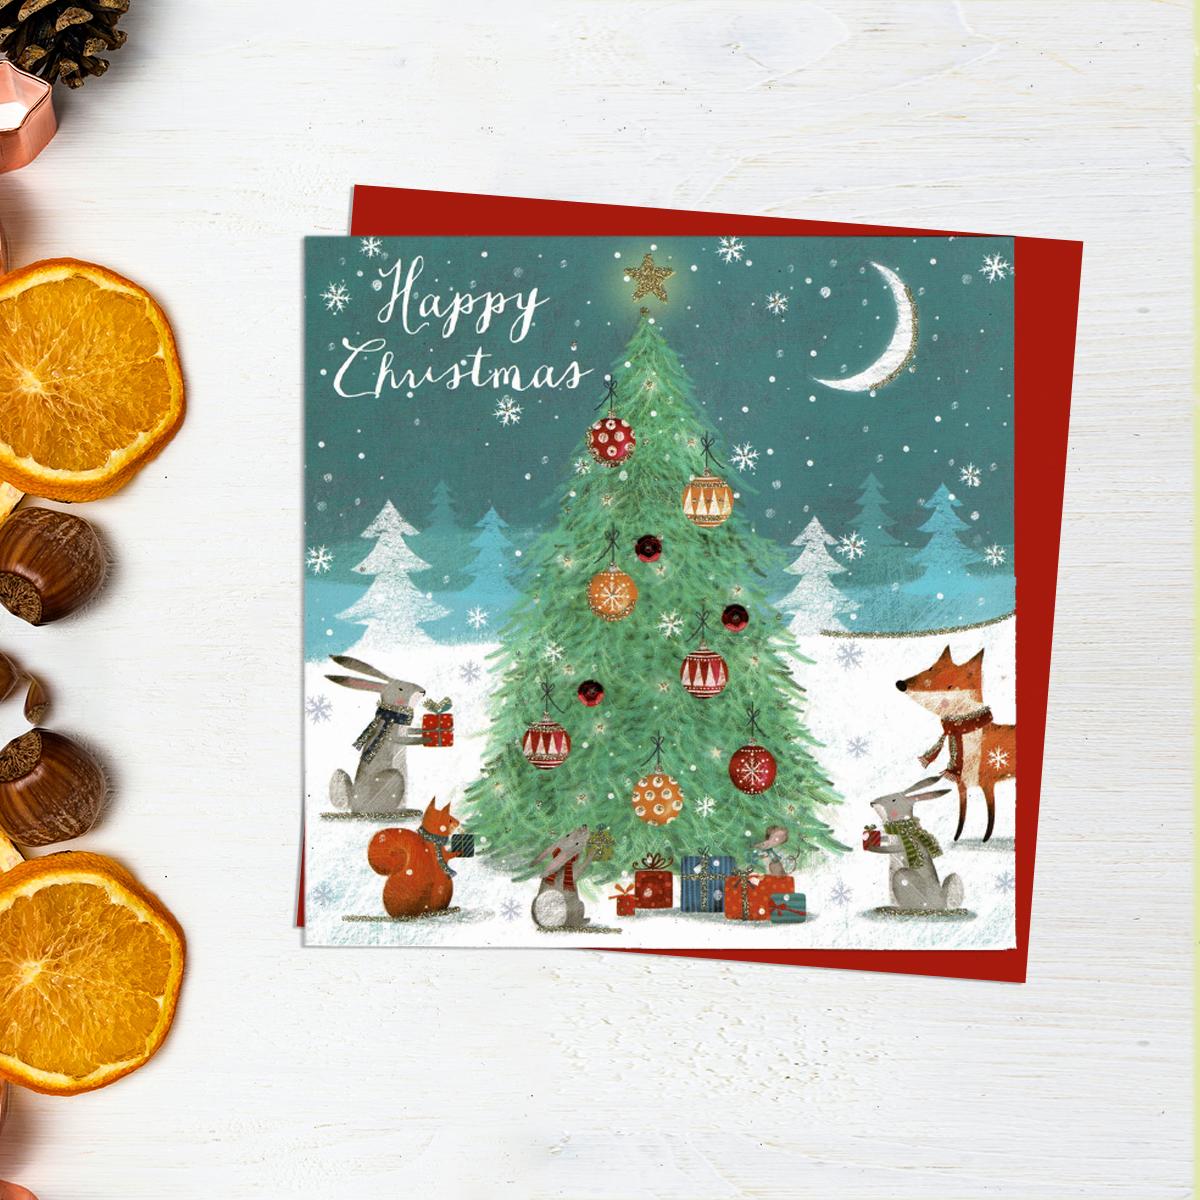 Happy Christmas Open Card Showing Tree And Woodland Animals. Added Sparkle For That Wow! Red Envelope